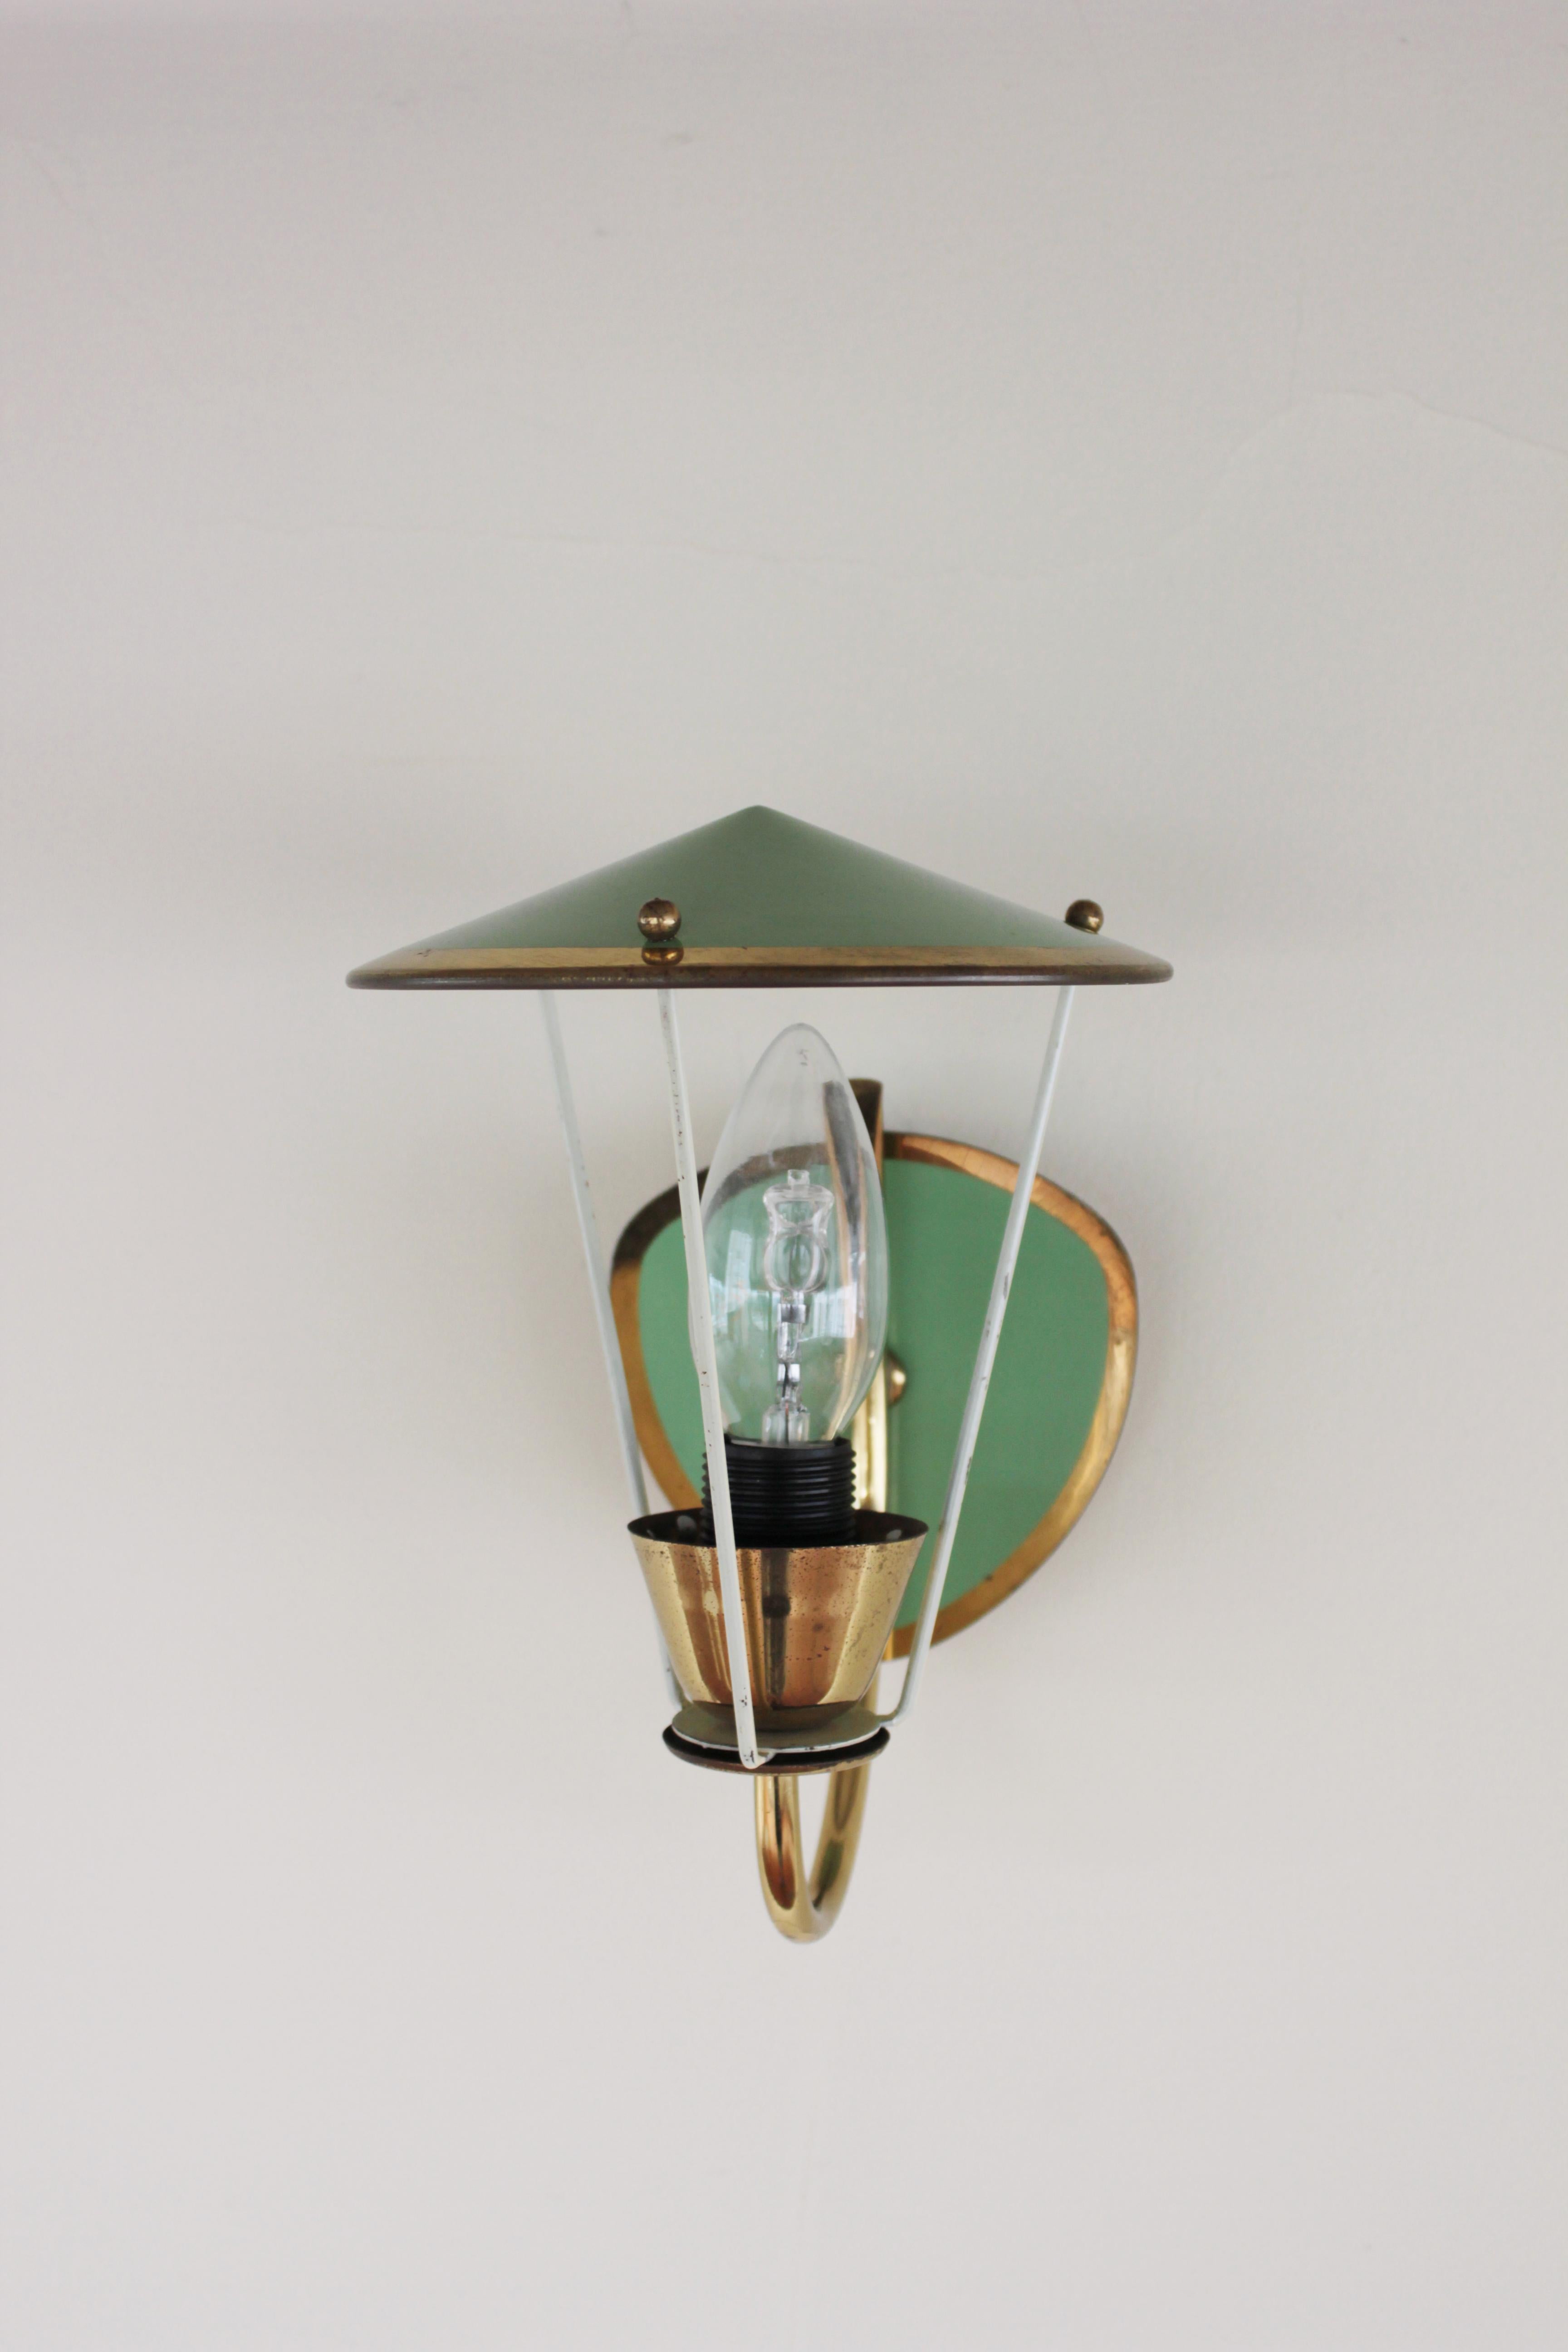 Italian wall lamp
Designer:
Production:
Origin: Italy
Period: 1960s
Material: brass
Color: gold and green
Dimensions: 